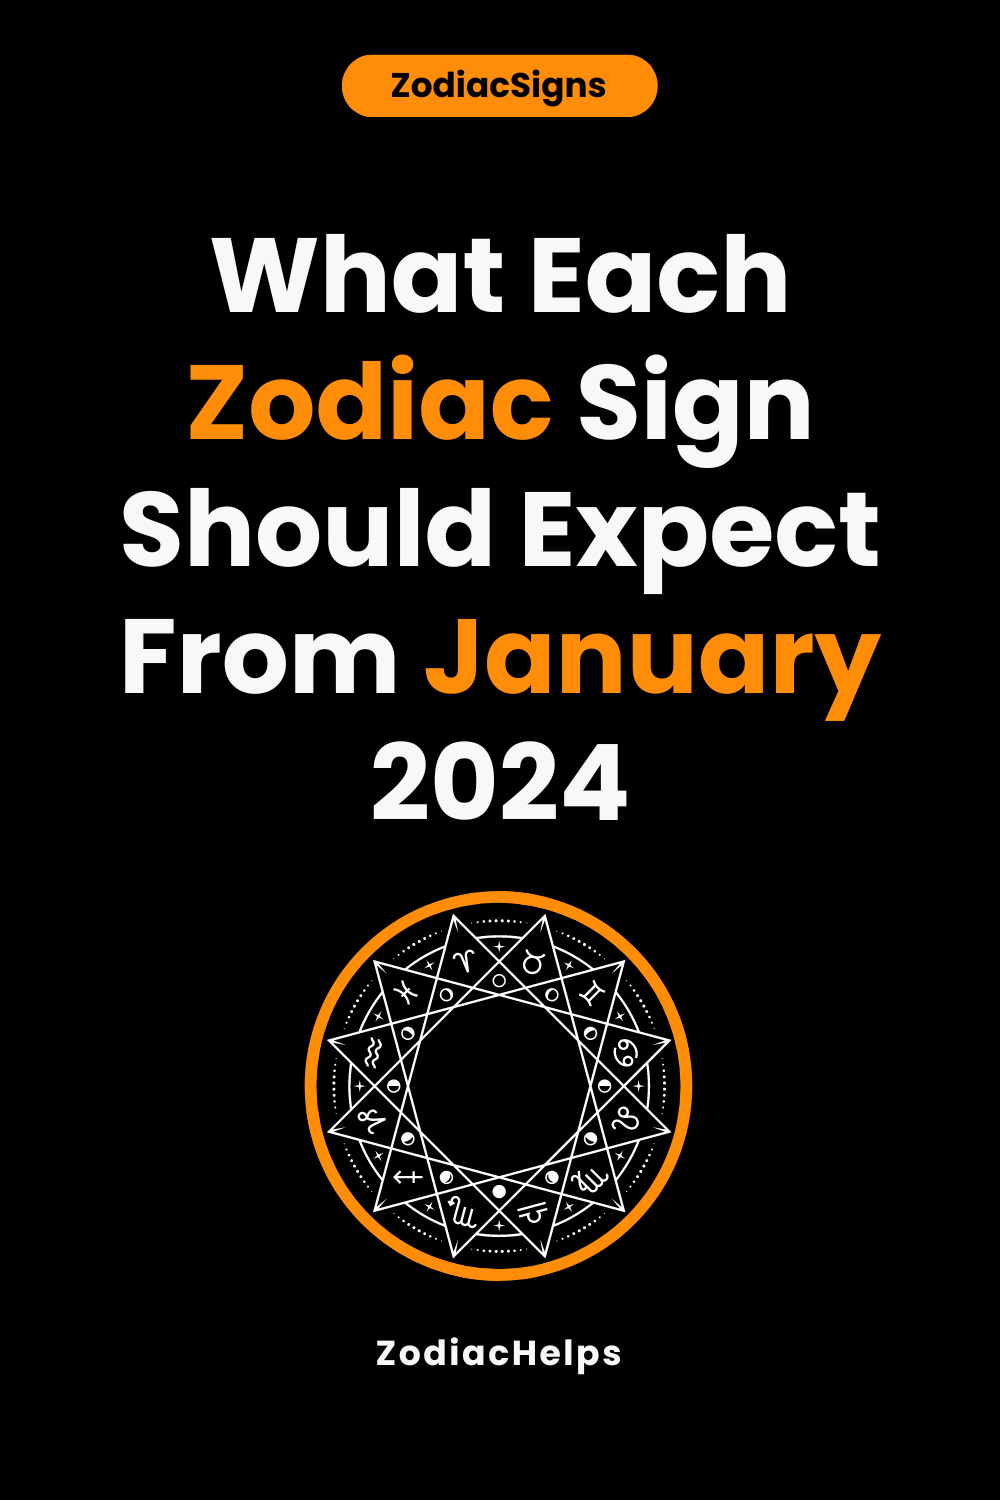 What Each Zodiac Sign Should Expect From January 2024